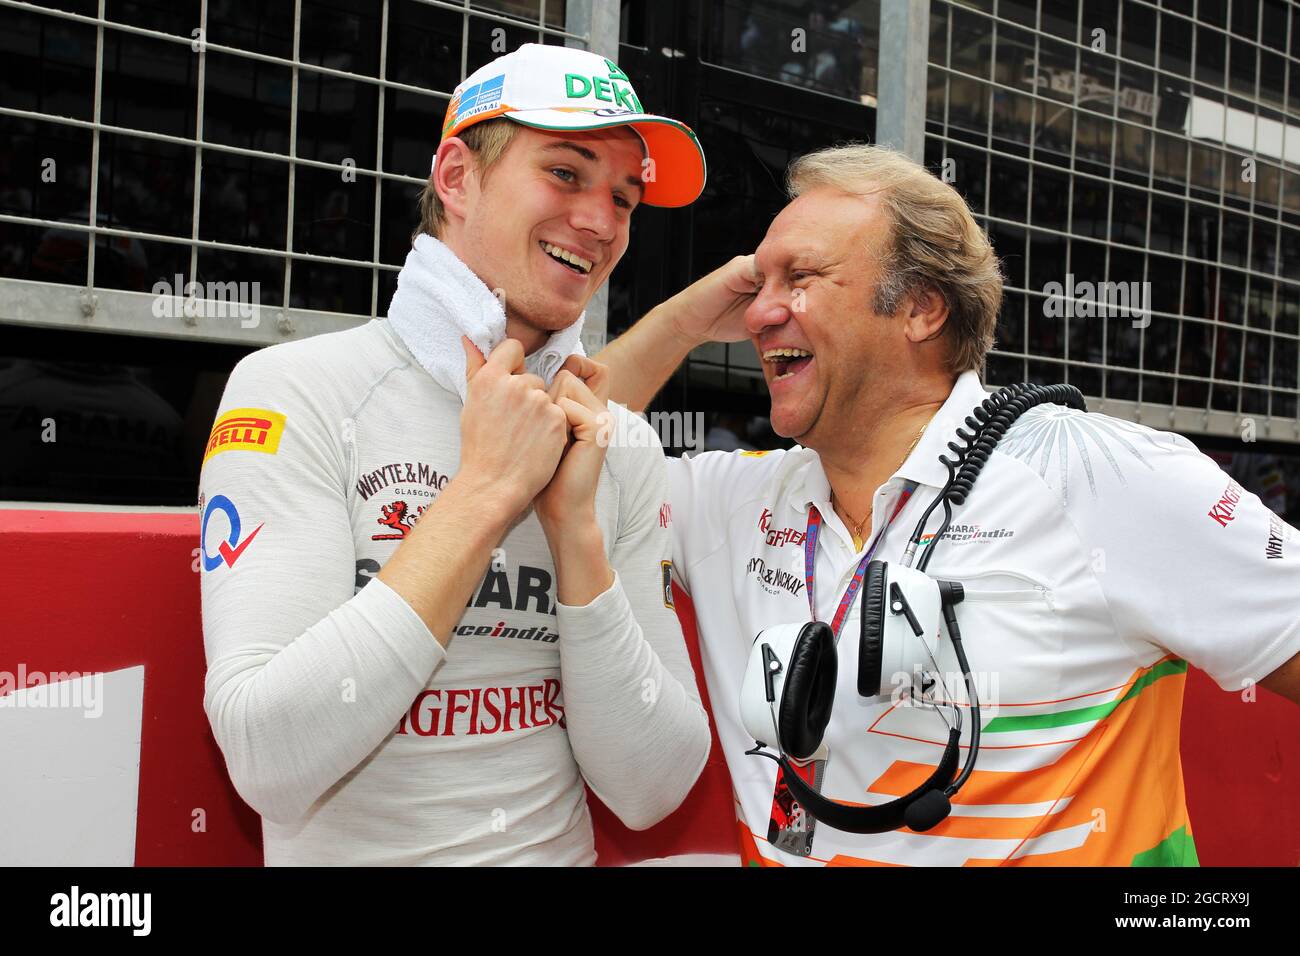 (L to R): Nico Hulkenberg (GER) Sahara Force India F1 on the grid with Robert Fearnley (GBR) Sahara Force India F1 Team Deputy Team Principal. Indian Grand Prix, Sunday 28th October 2012. Greater Noida, New Delhi, India. Stock Photo